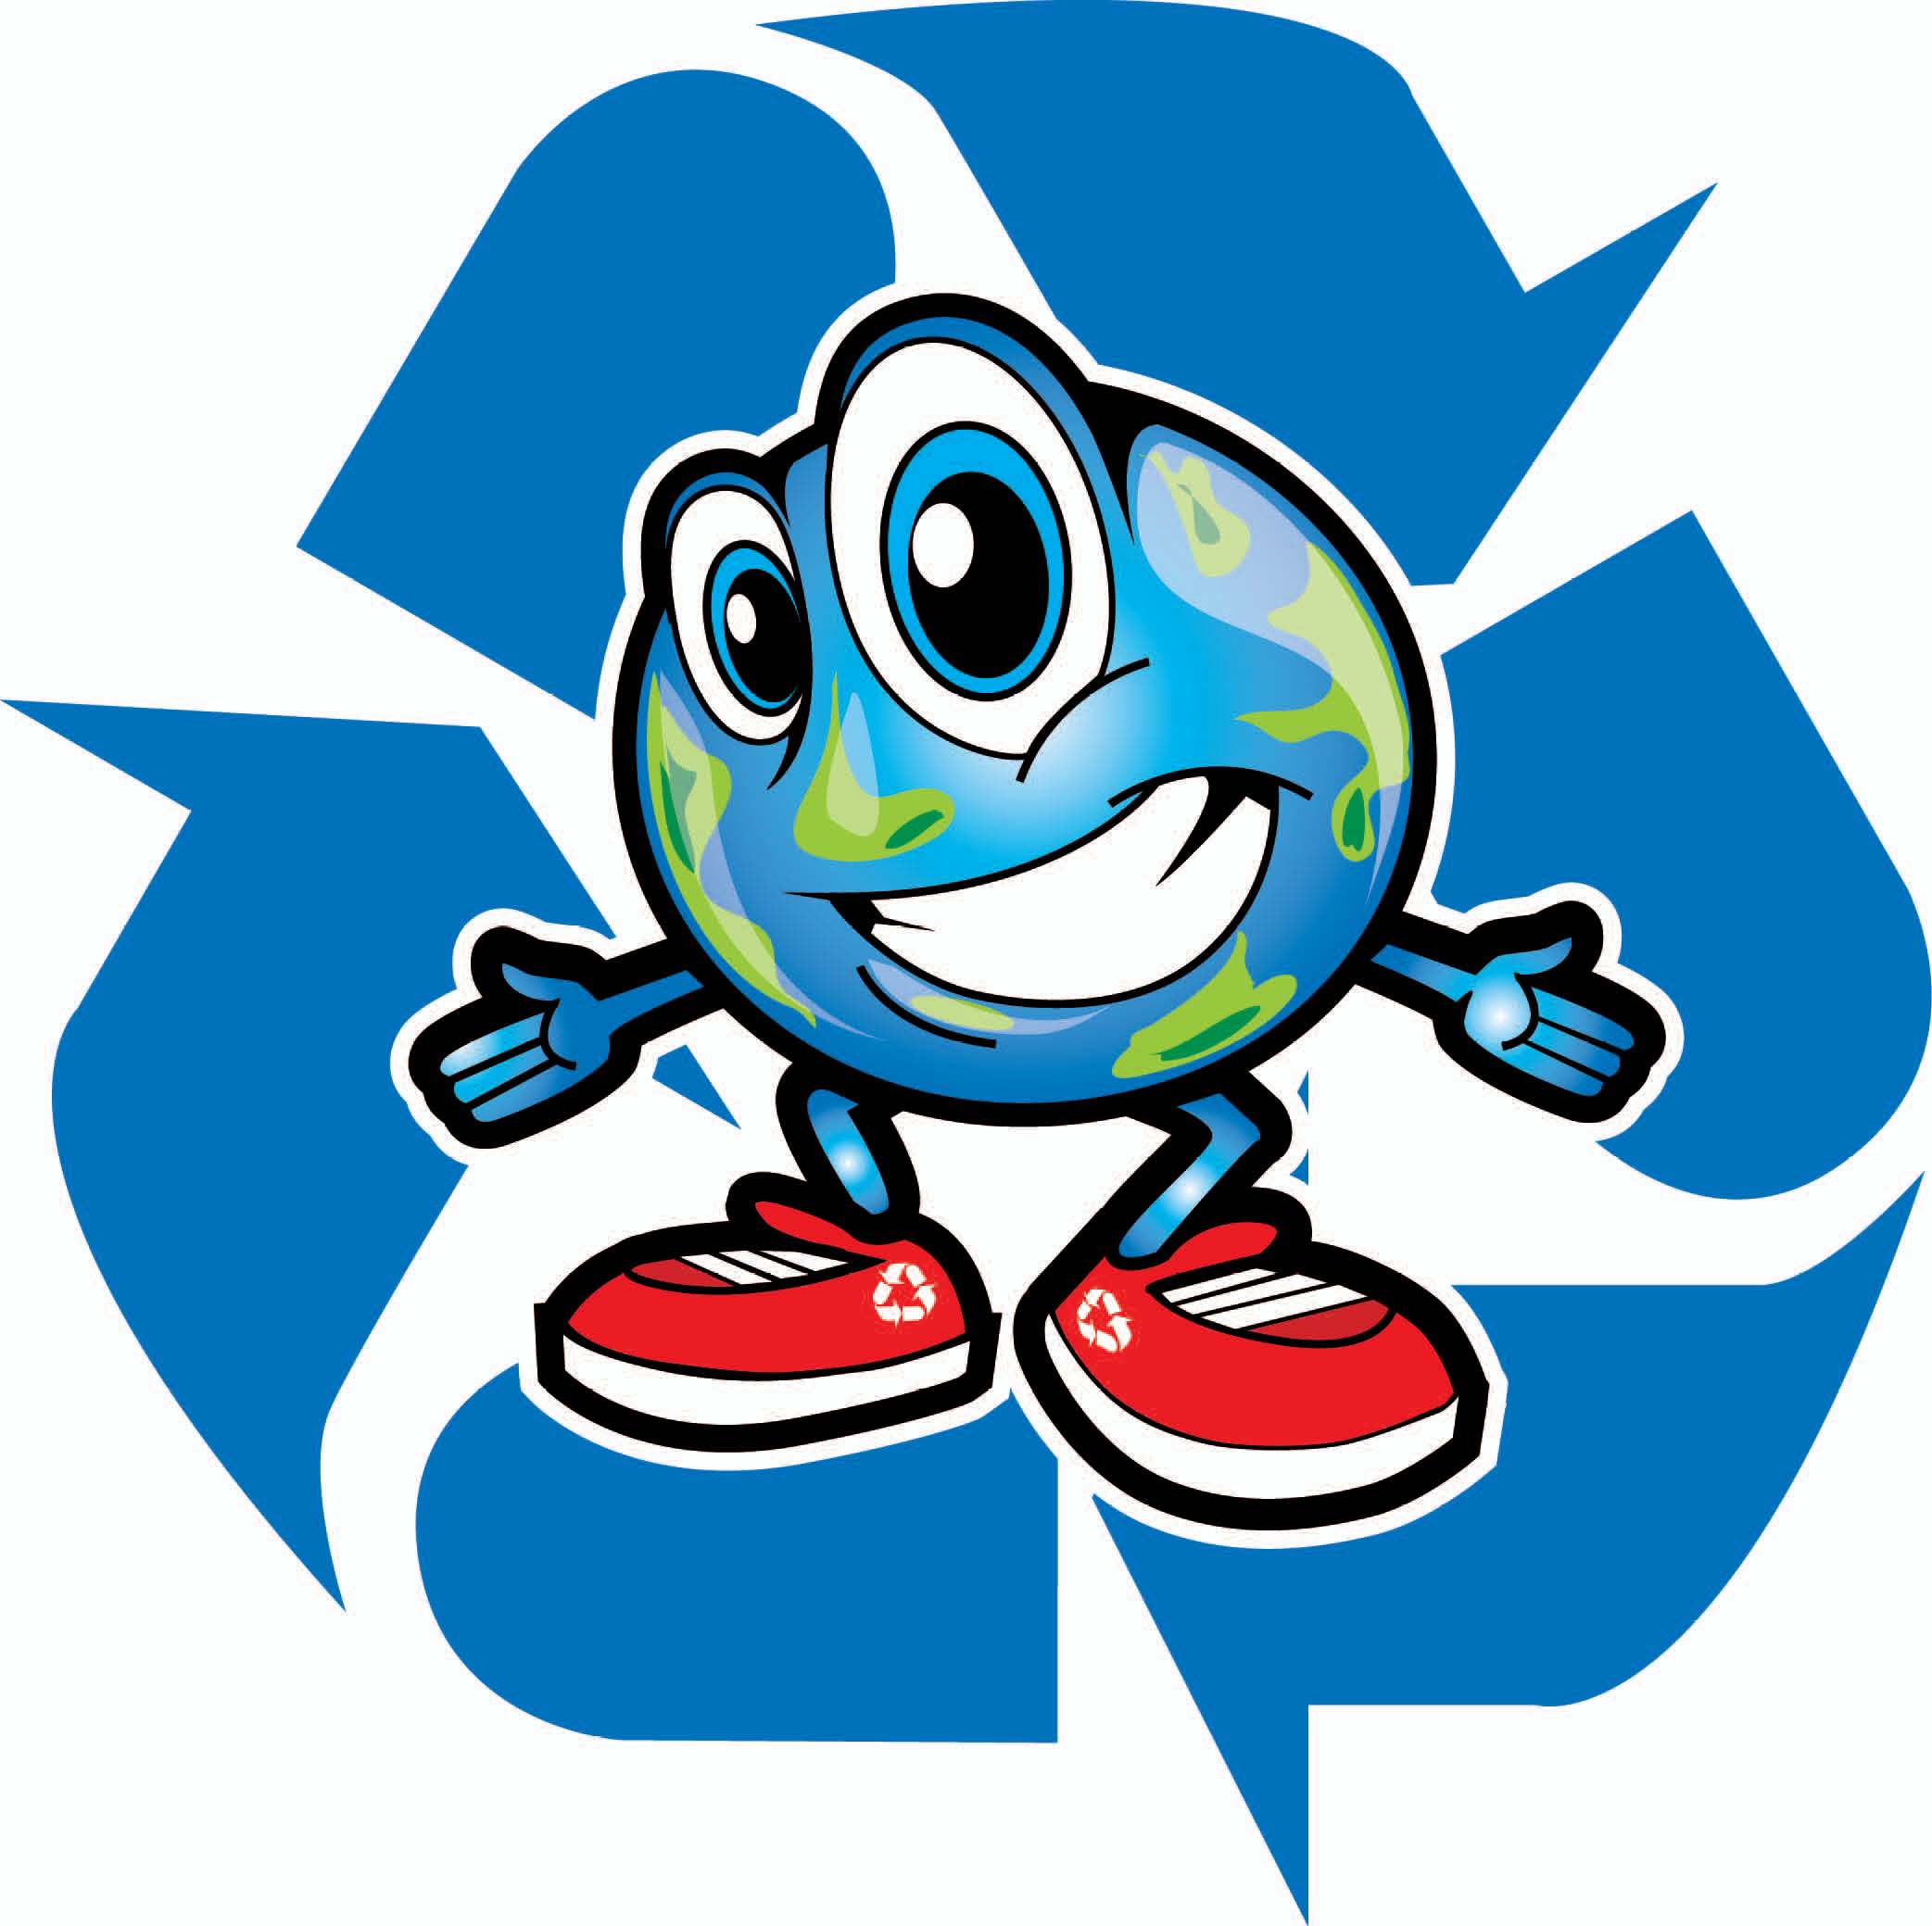 Recycle Clipart Plastic Recycling Free Clip Art Stock - vrogue.co